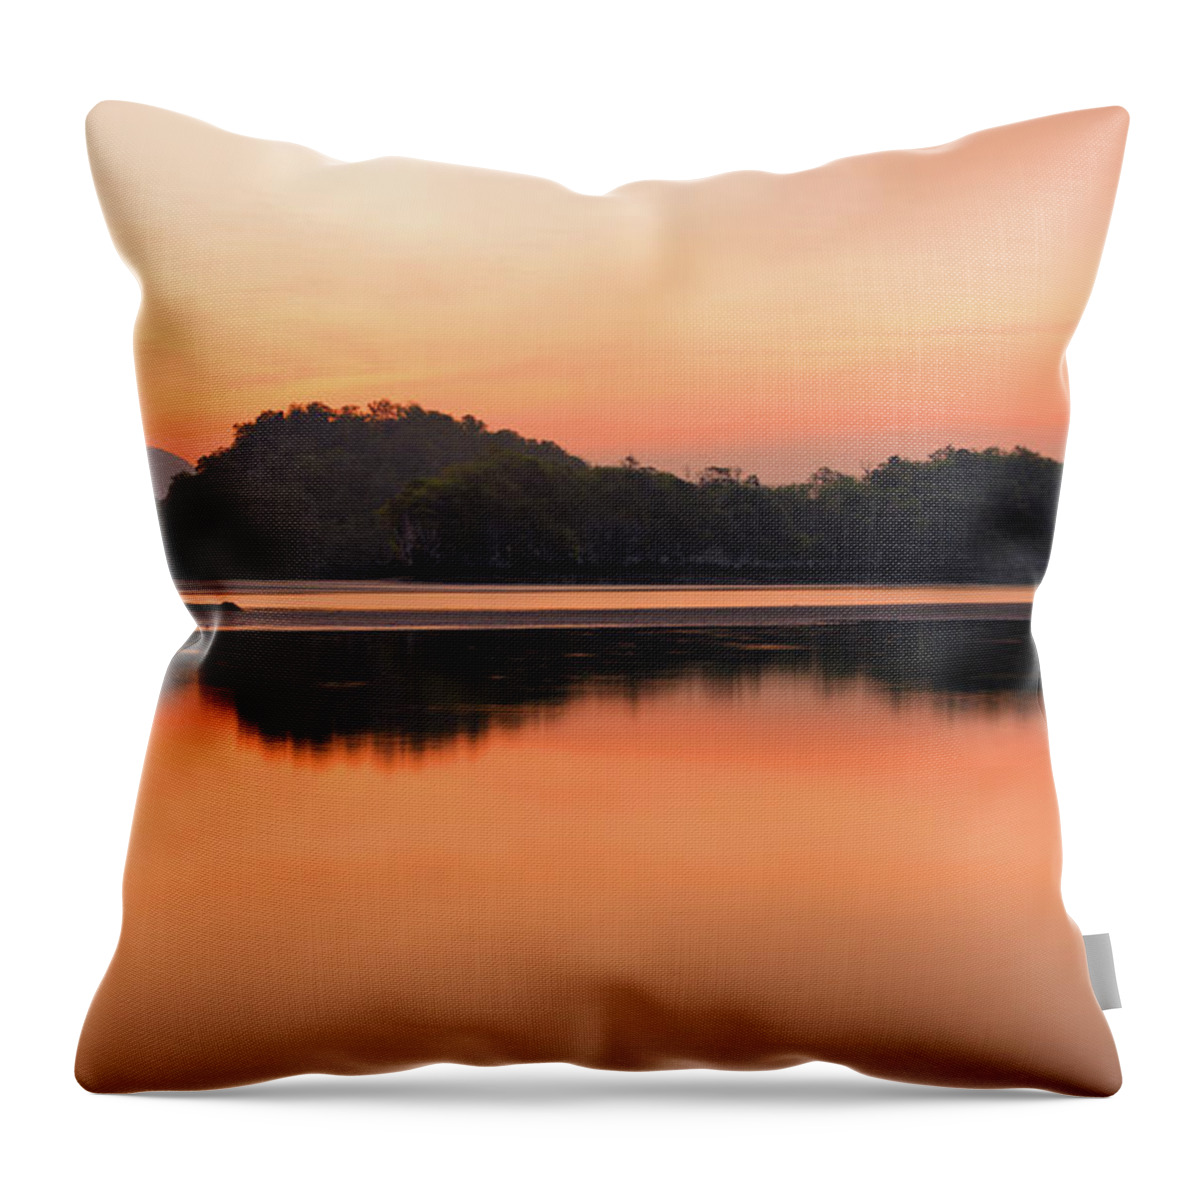 Scenics Throw Pillow featuring the photograph Morning In Krabi by Photography Aubrey Stoll